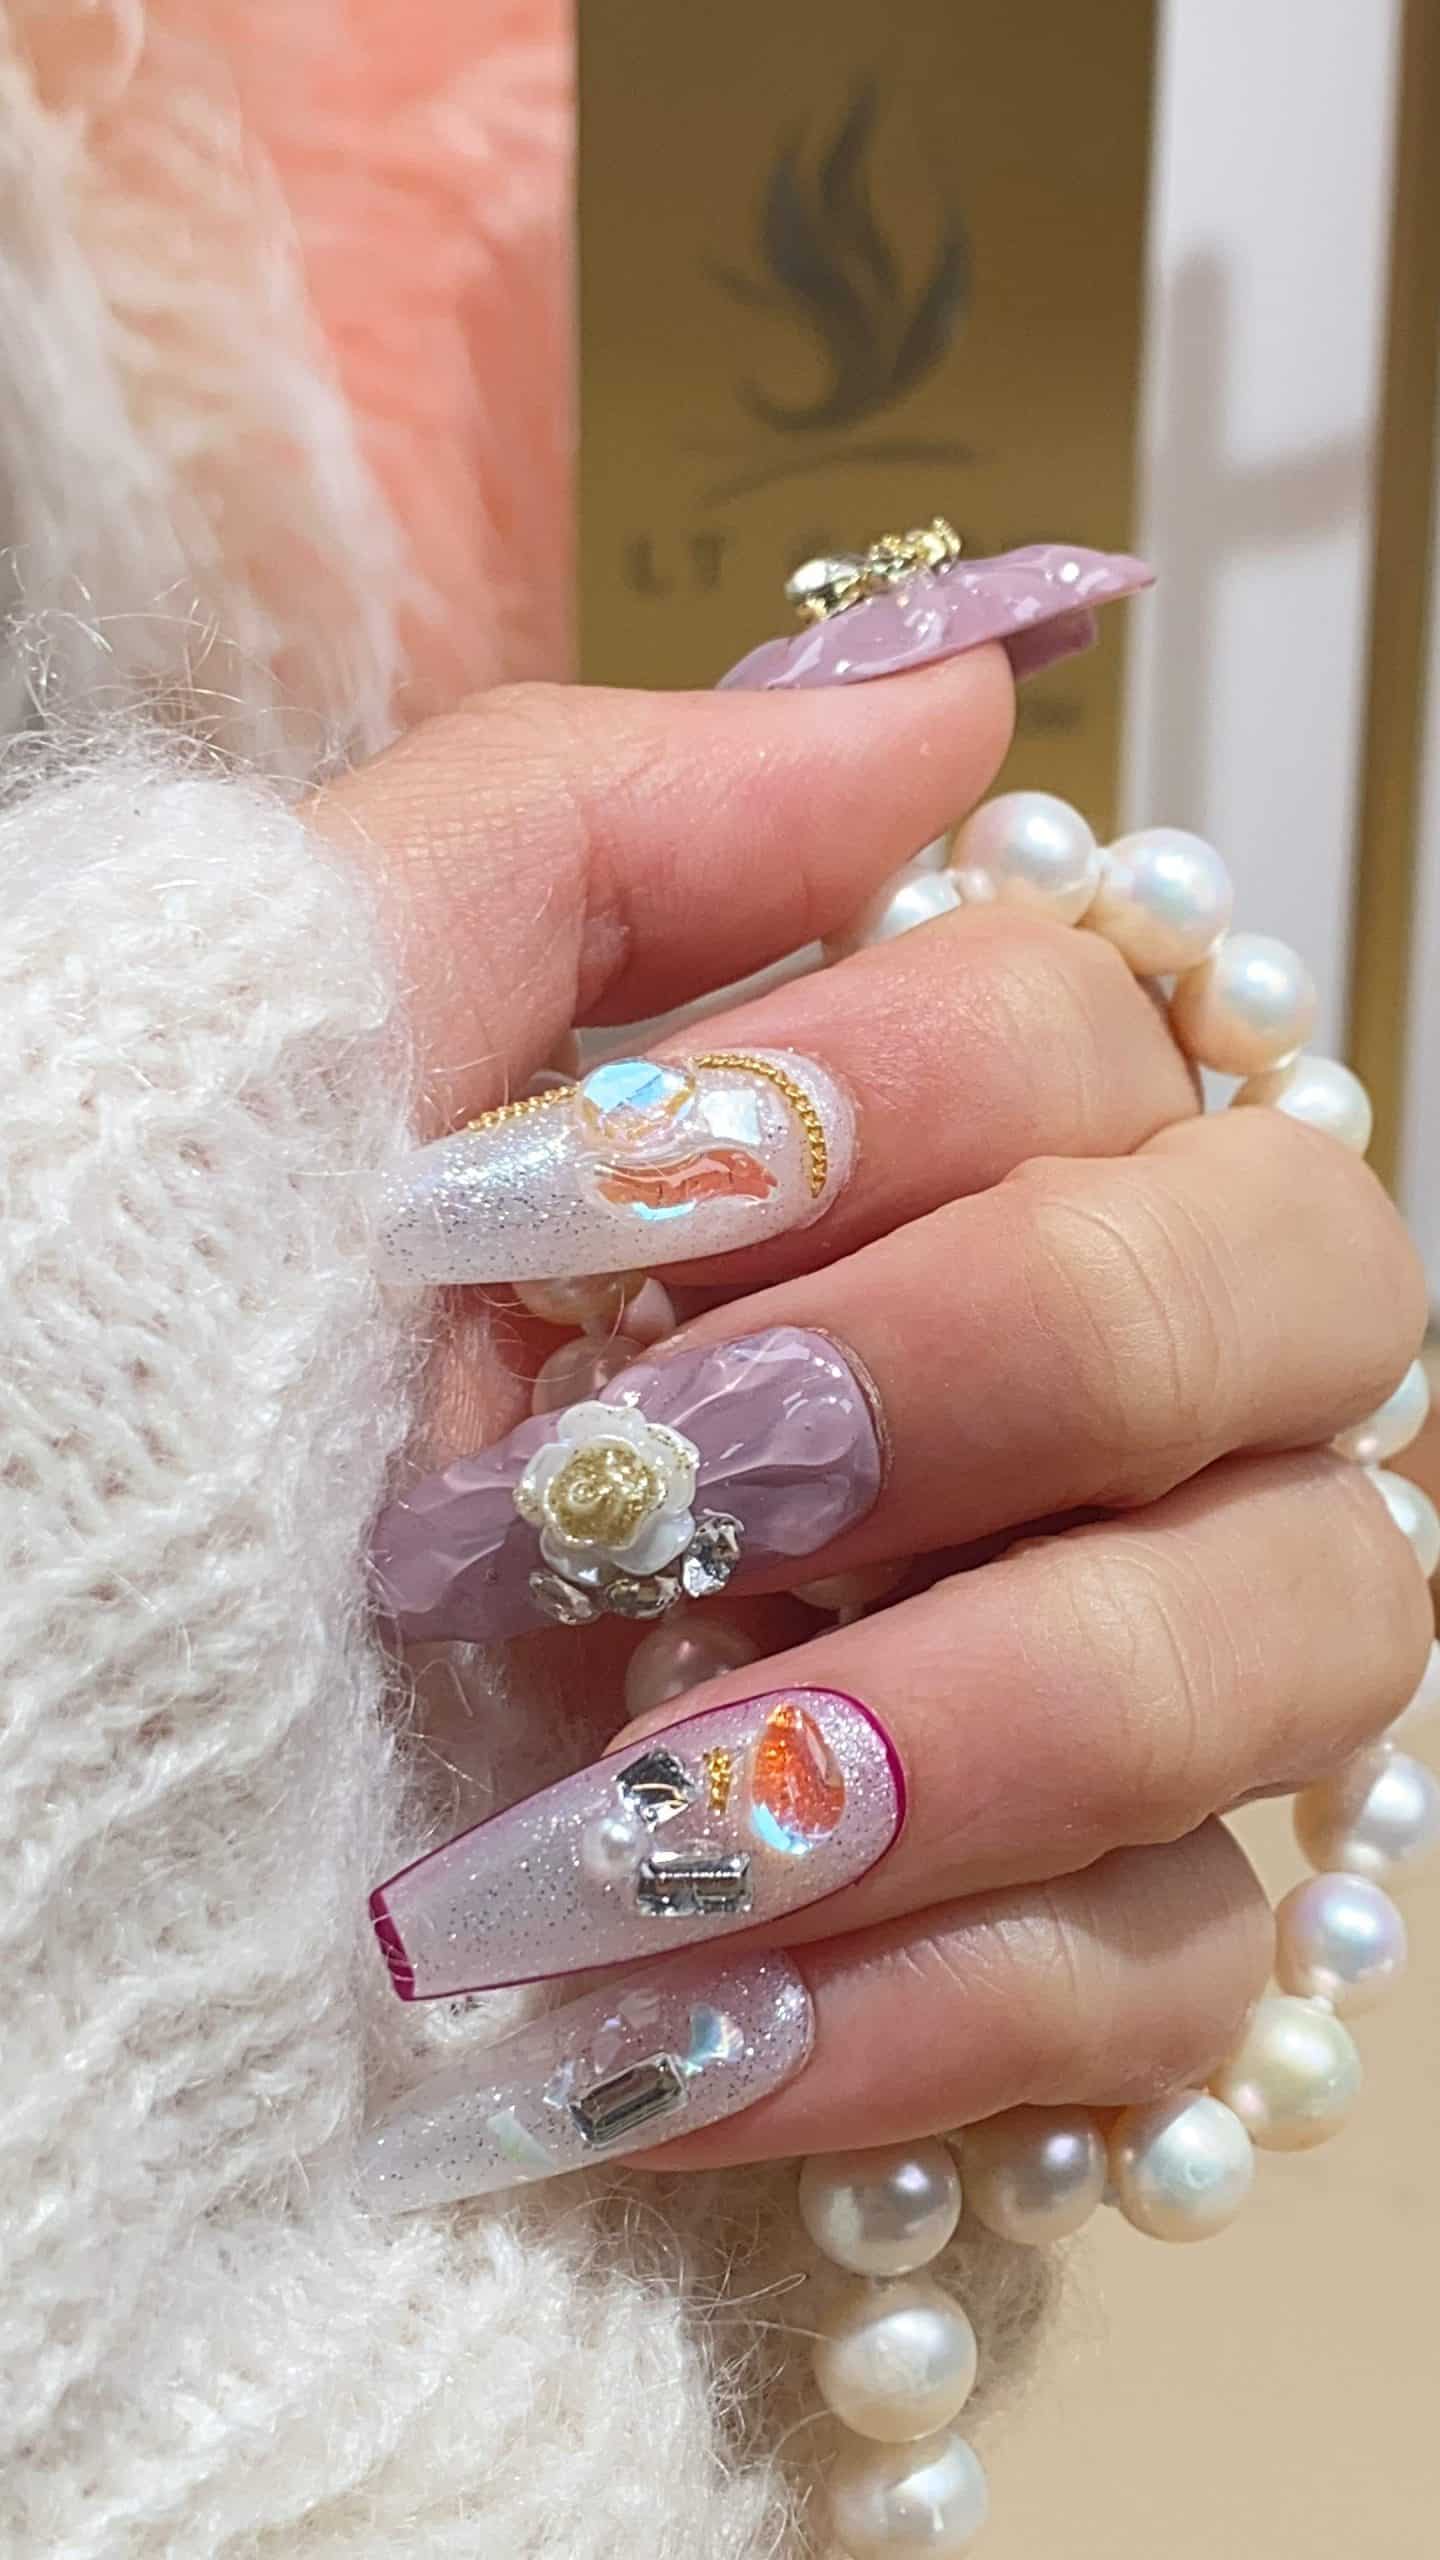 20+ Dazzling Coffin Nails With Rhinestones - The Glossychic